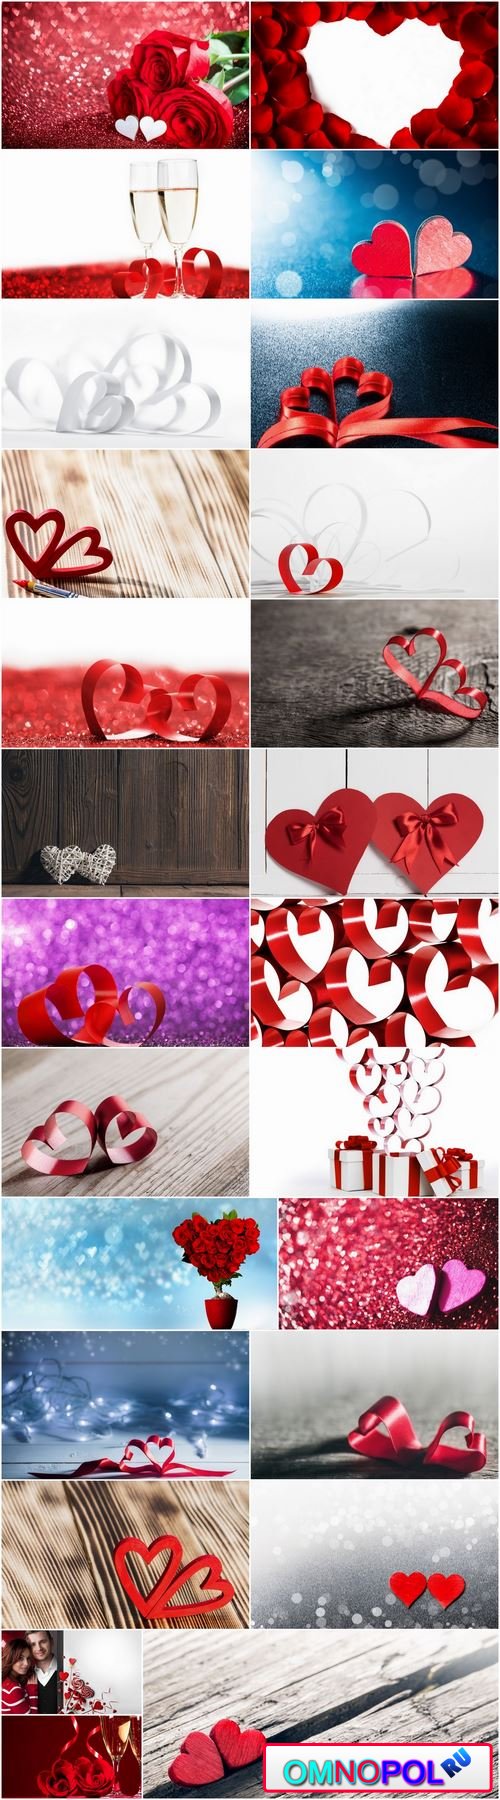 Valentines Day heart decoration ribbon red paint 25 HQ Jpeg